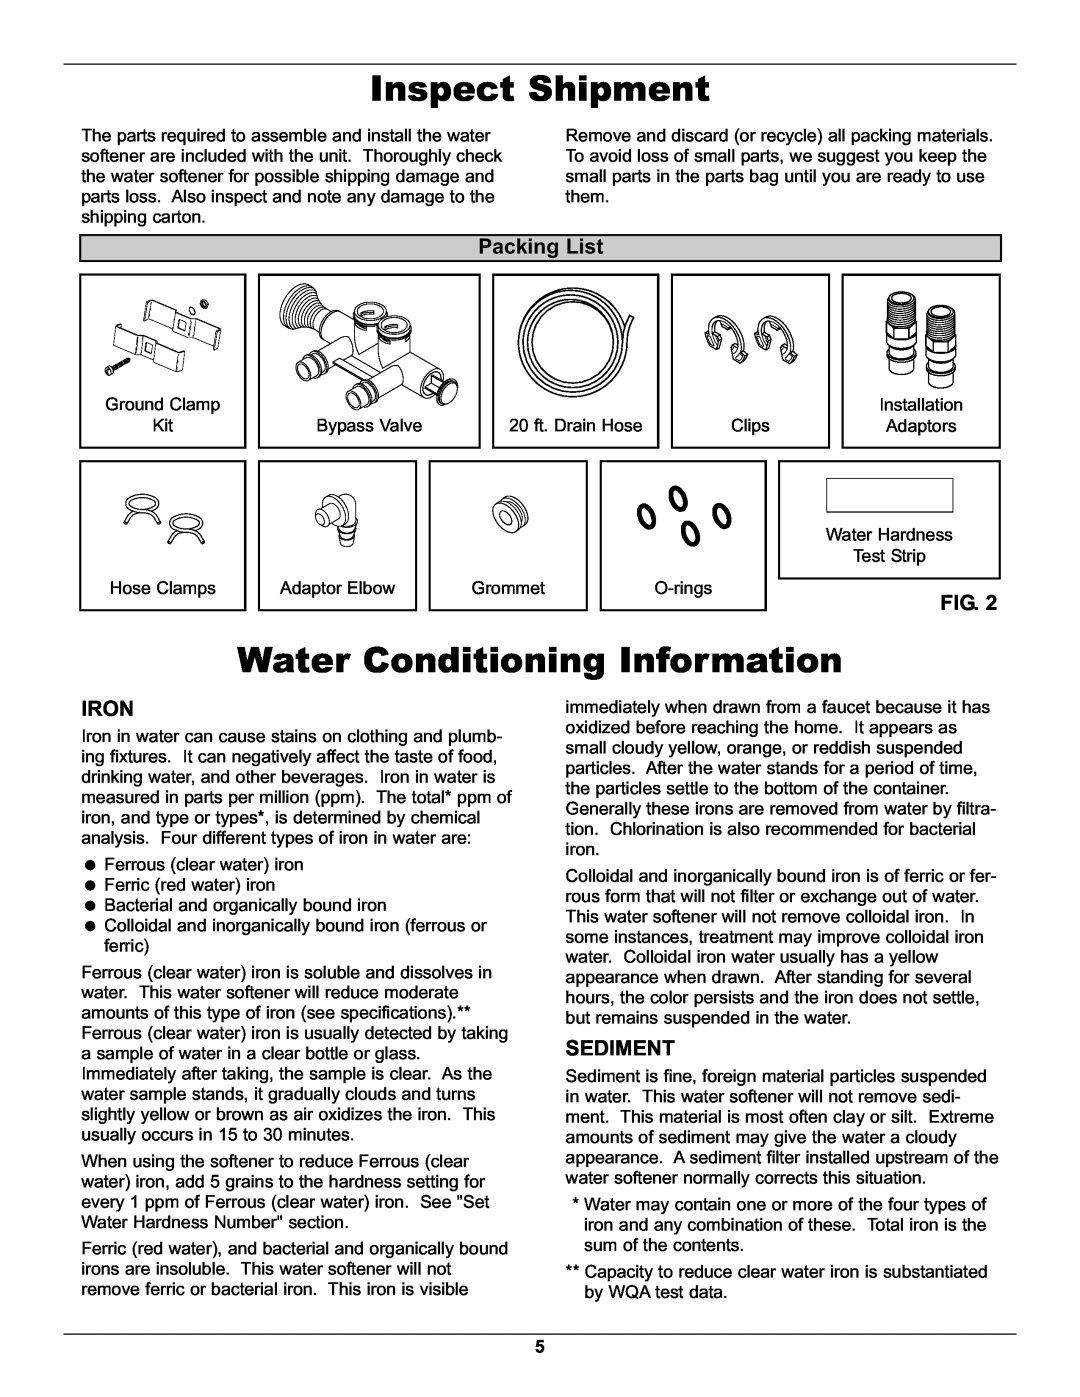 Whirlpool WHES40 operation manual Inspect Shipment, Water Conditioning Information, Iron, Sediment 